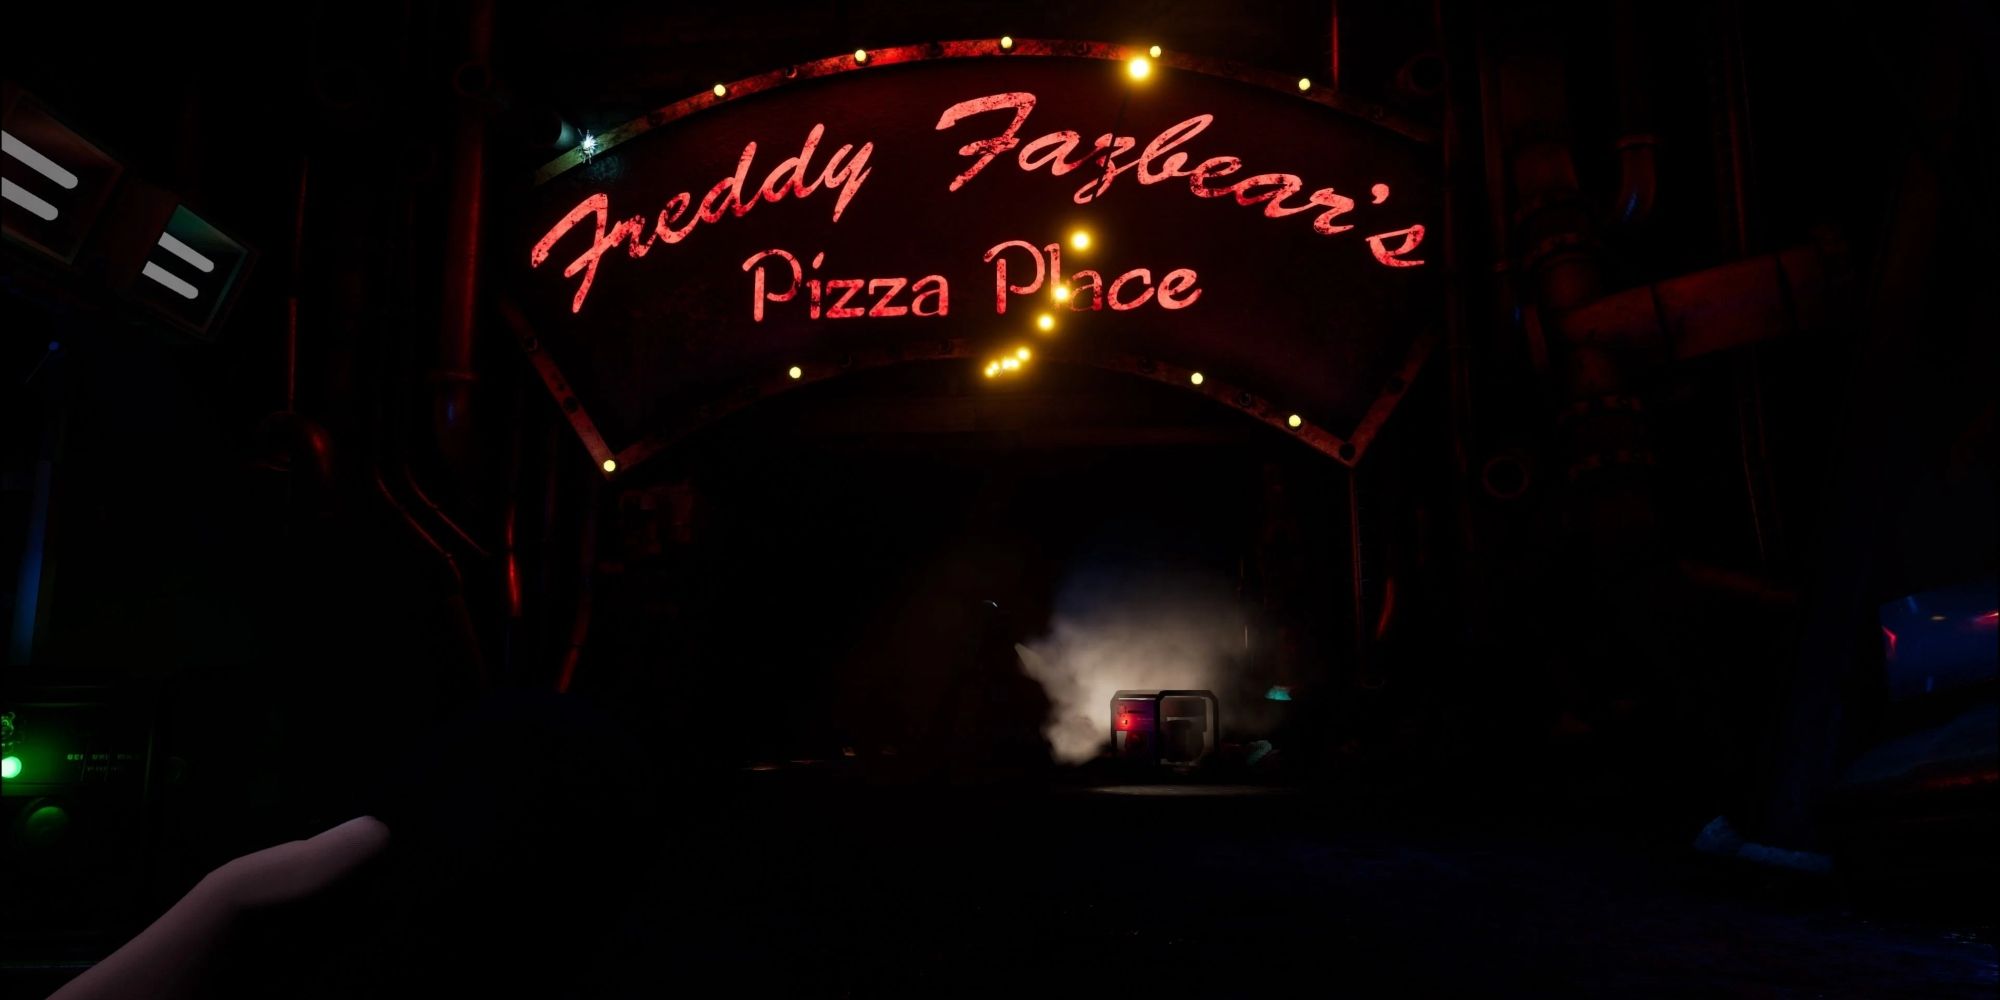 A dark tunnel that clearly shows the lit sign of Freddy Fazbear's Pizza Place